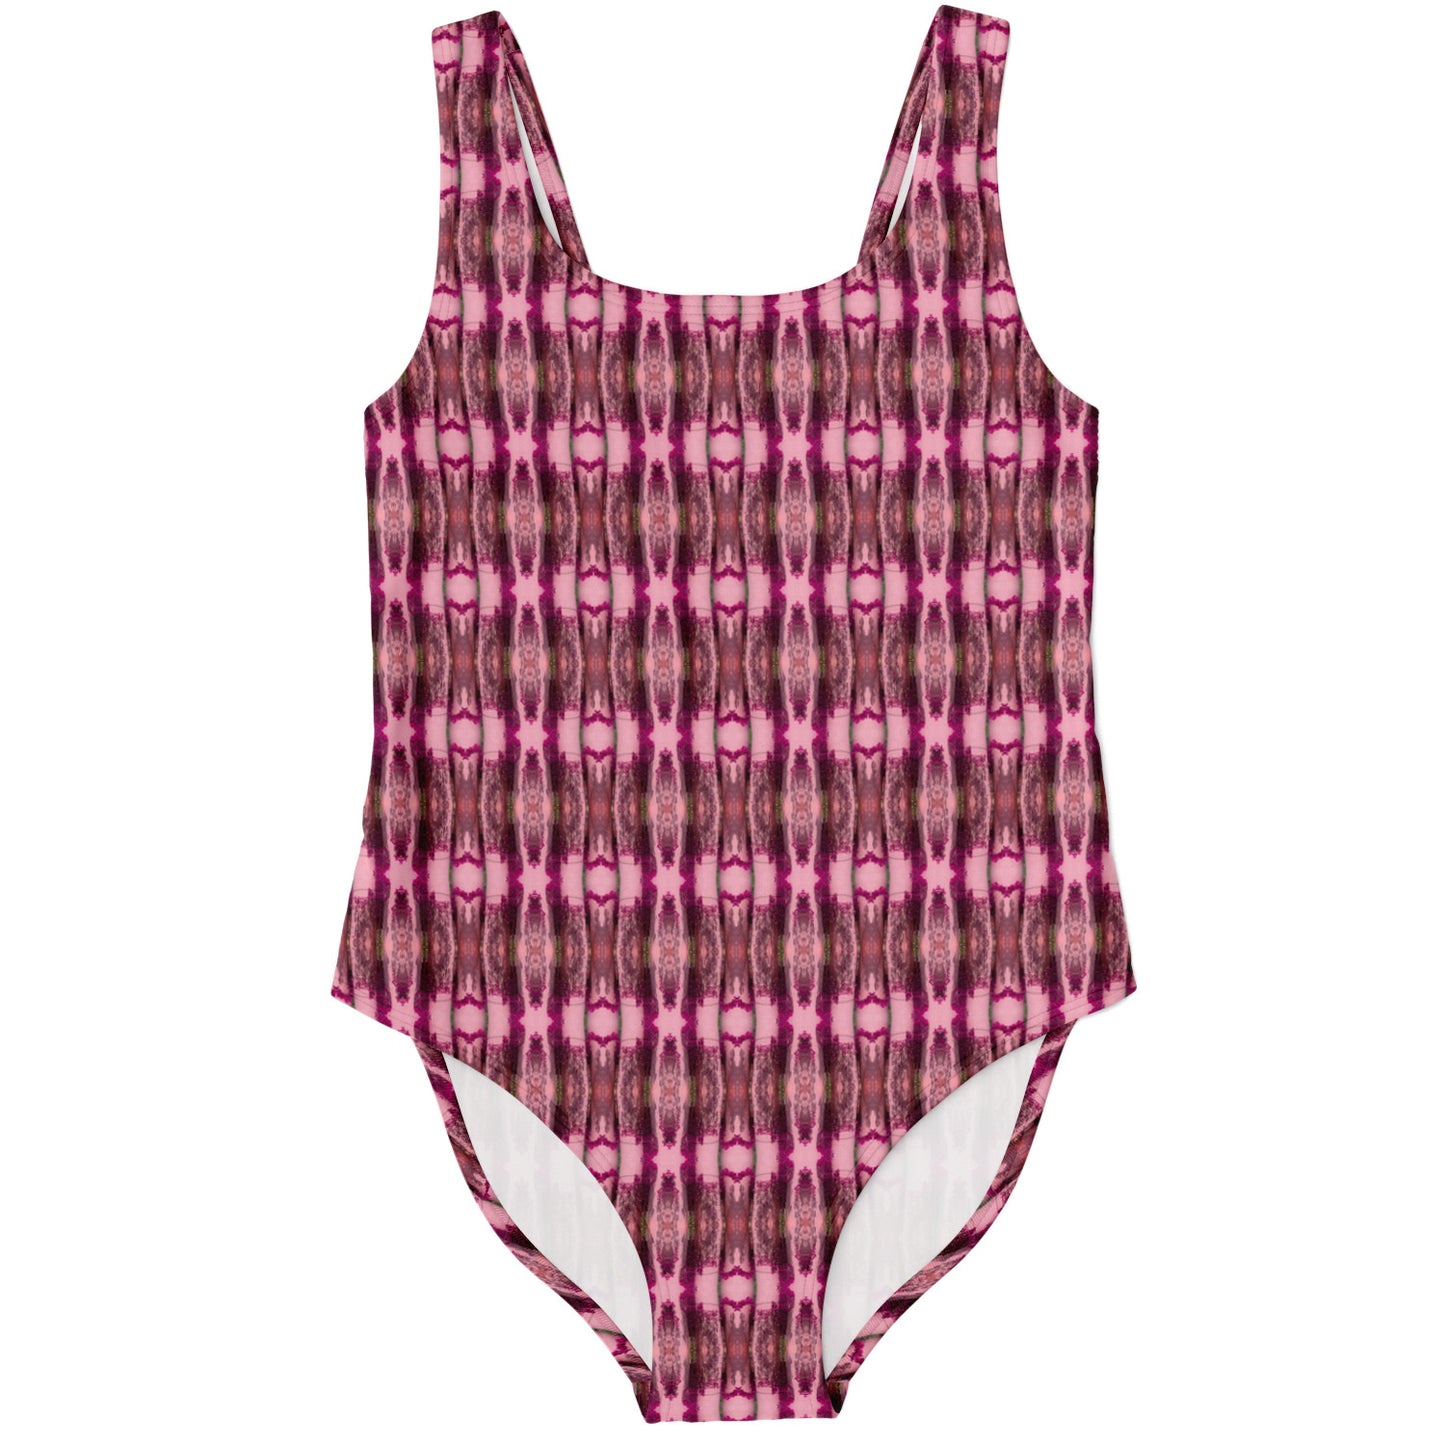 One-Piece Swimsuit Woman (Candy Cane)